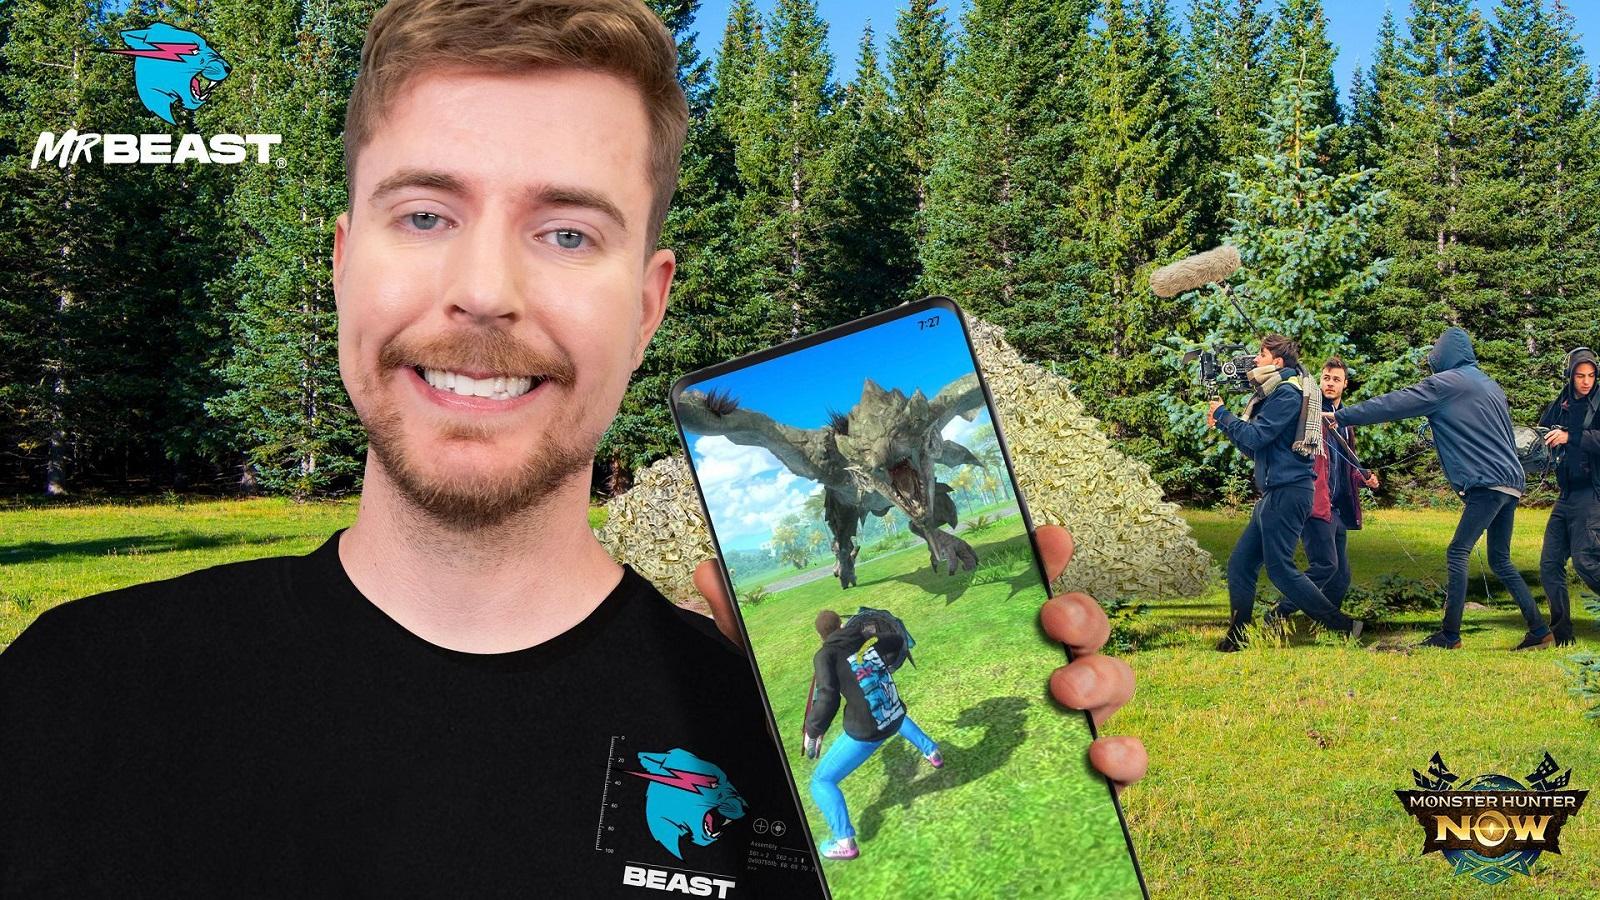 MrBeast holding a phone with Monster Hunter Now on it